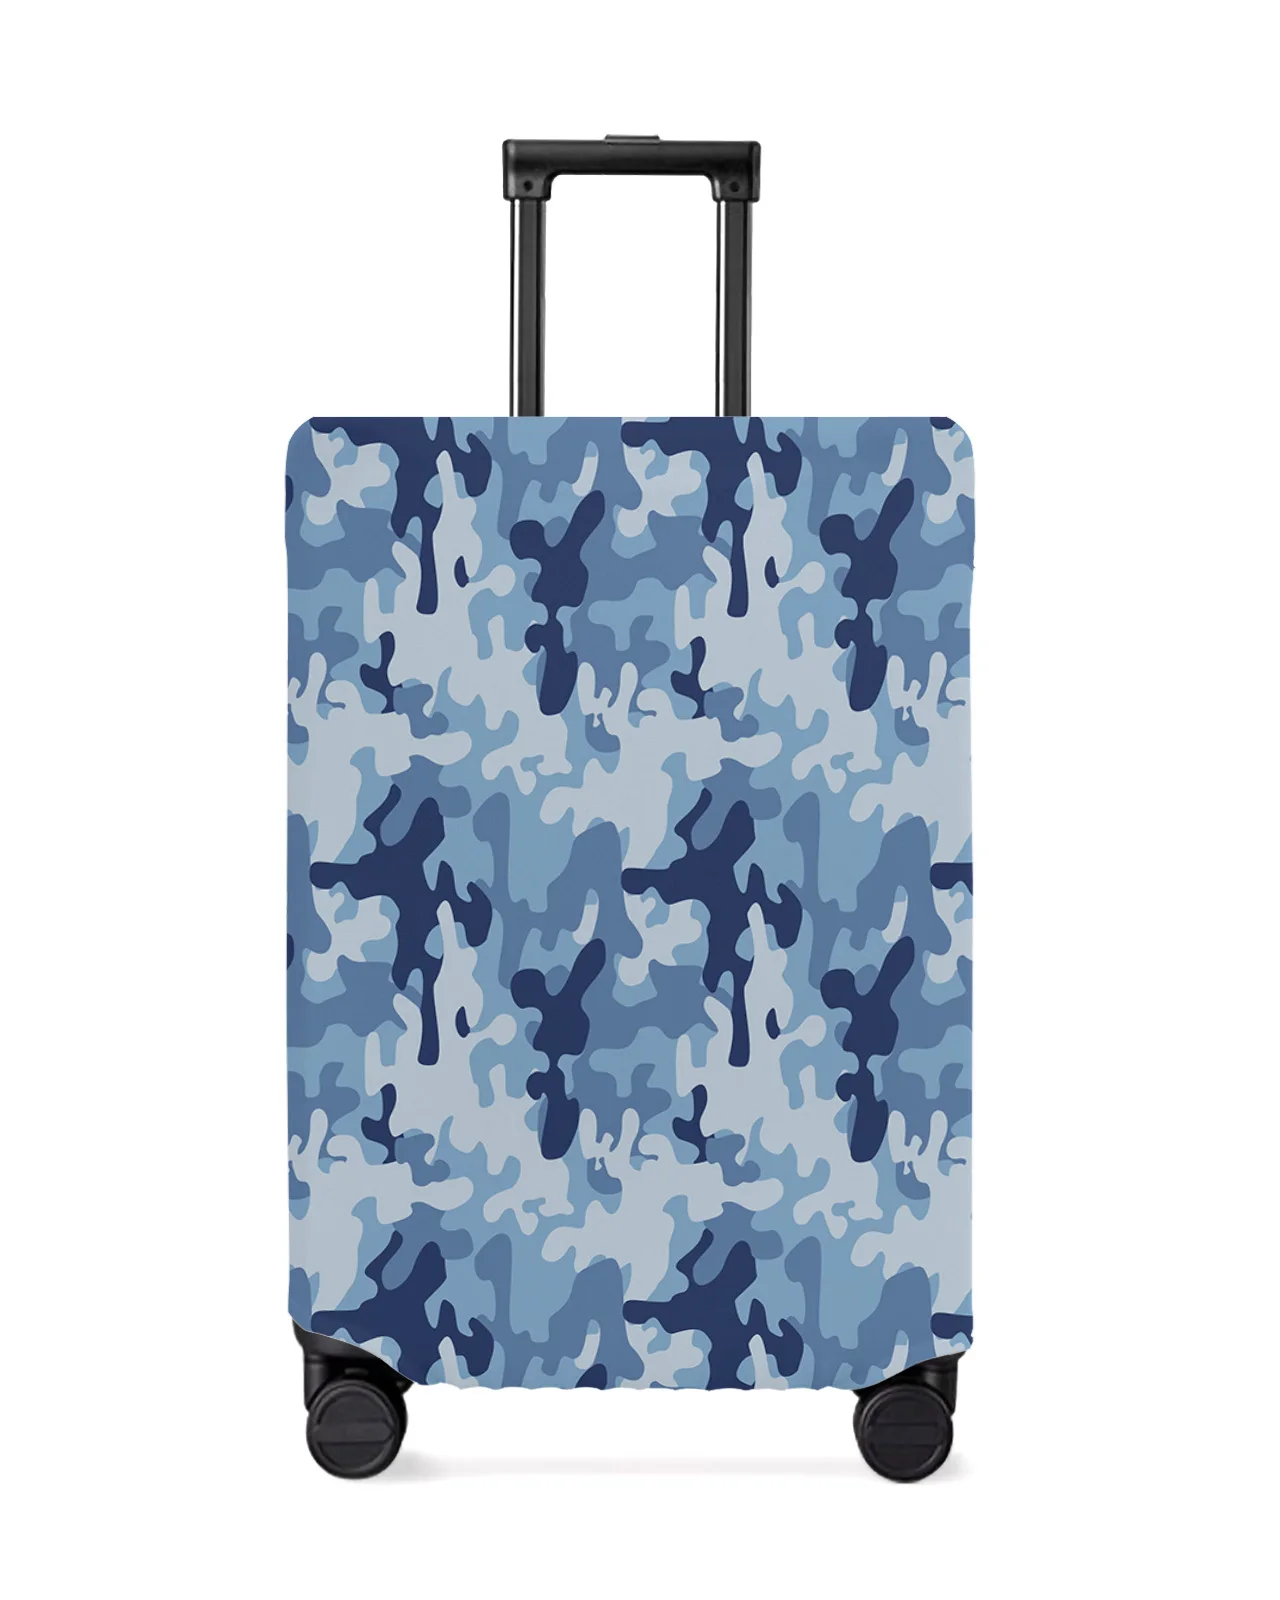 military-blue-camouflage-travel-luggage-cover-elastic-baggage-cover-for-18-32-inch-suitcase-case-dust-cover-travel-accessories